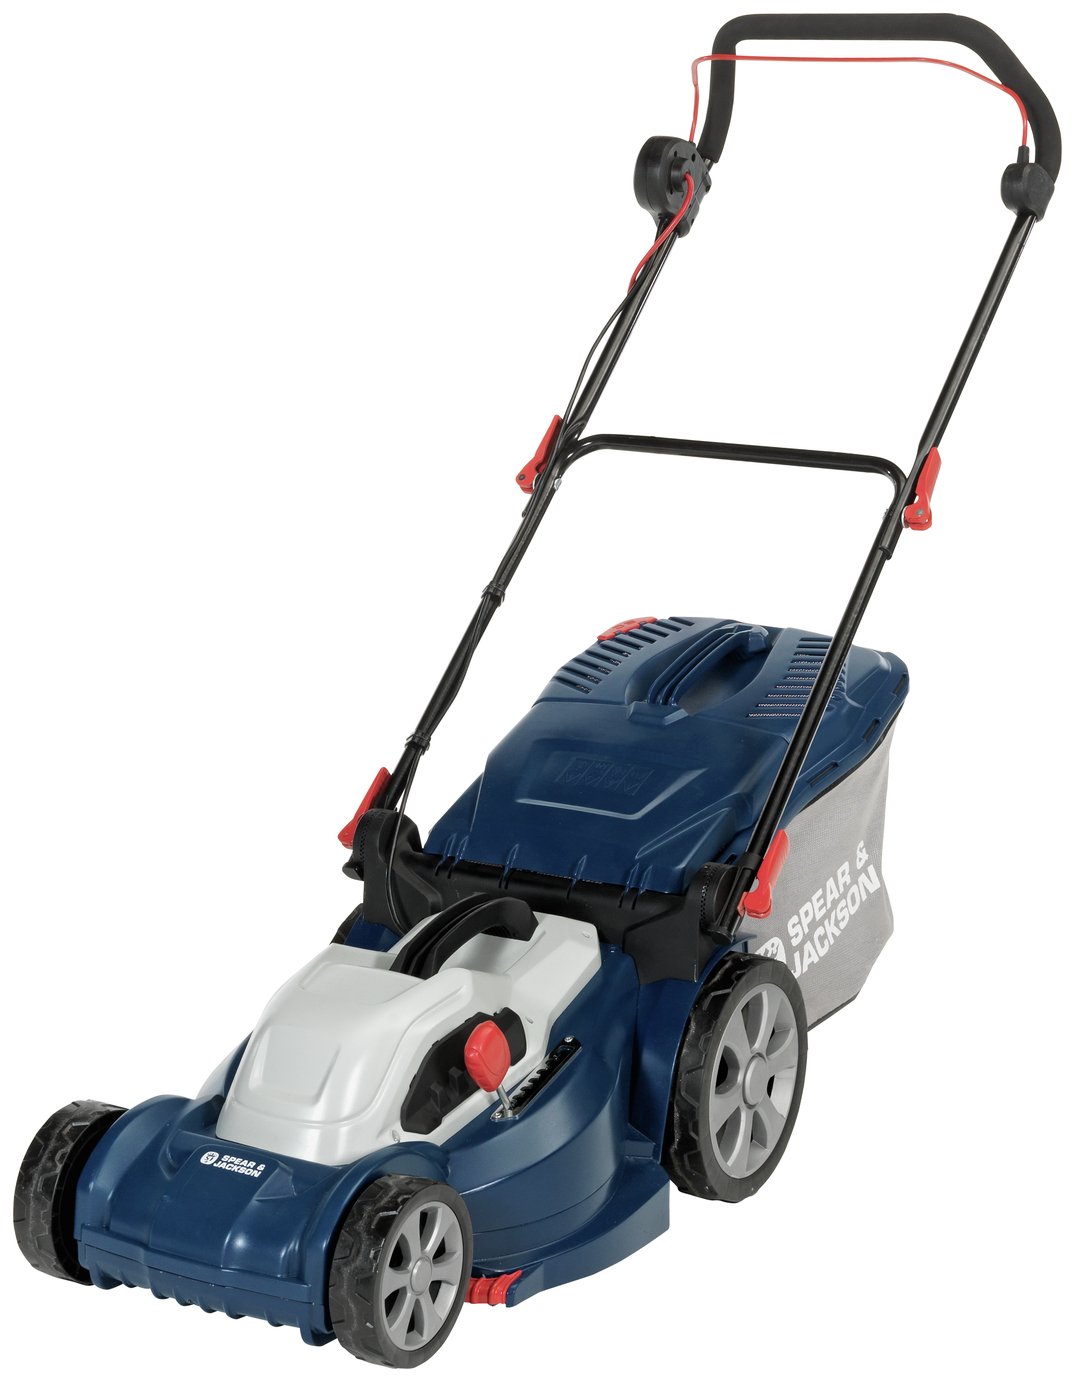 Spear & Jackson 40cm Corded Rotary Lawnmower review